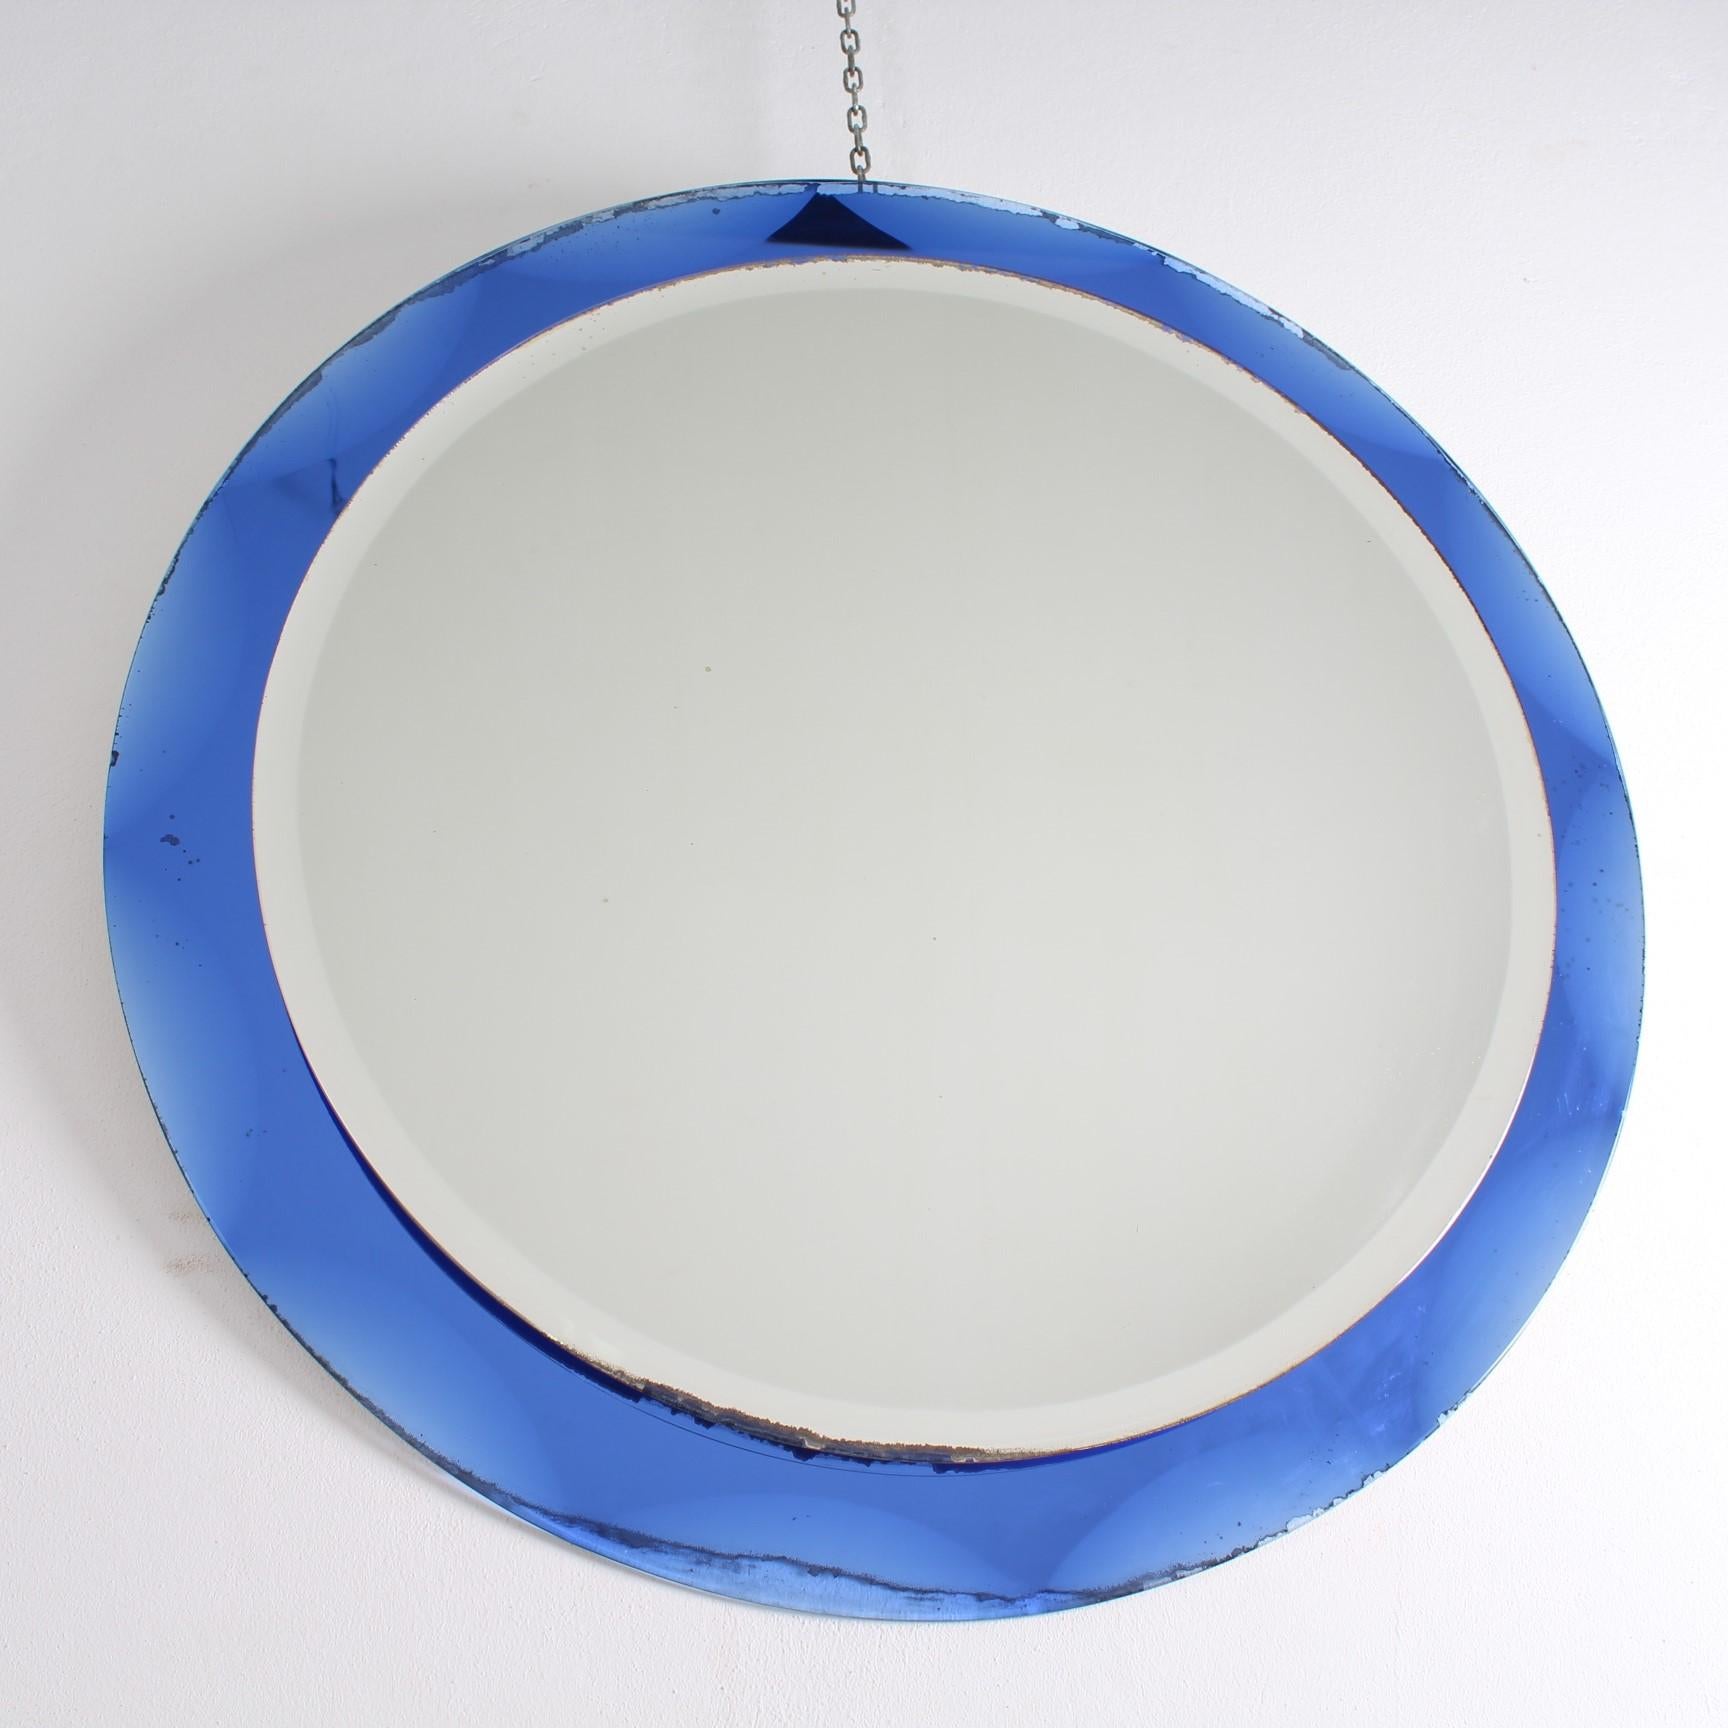 Blue framed Italian mirror
Tiered and shaped Italian mirror. Glass mirror plate sitting on blue mirrored glass. Bevelling to both tiers.
Wear consistent with age and use.
 